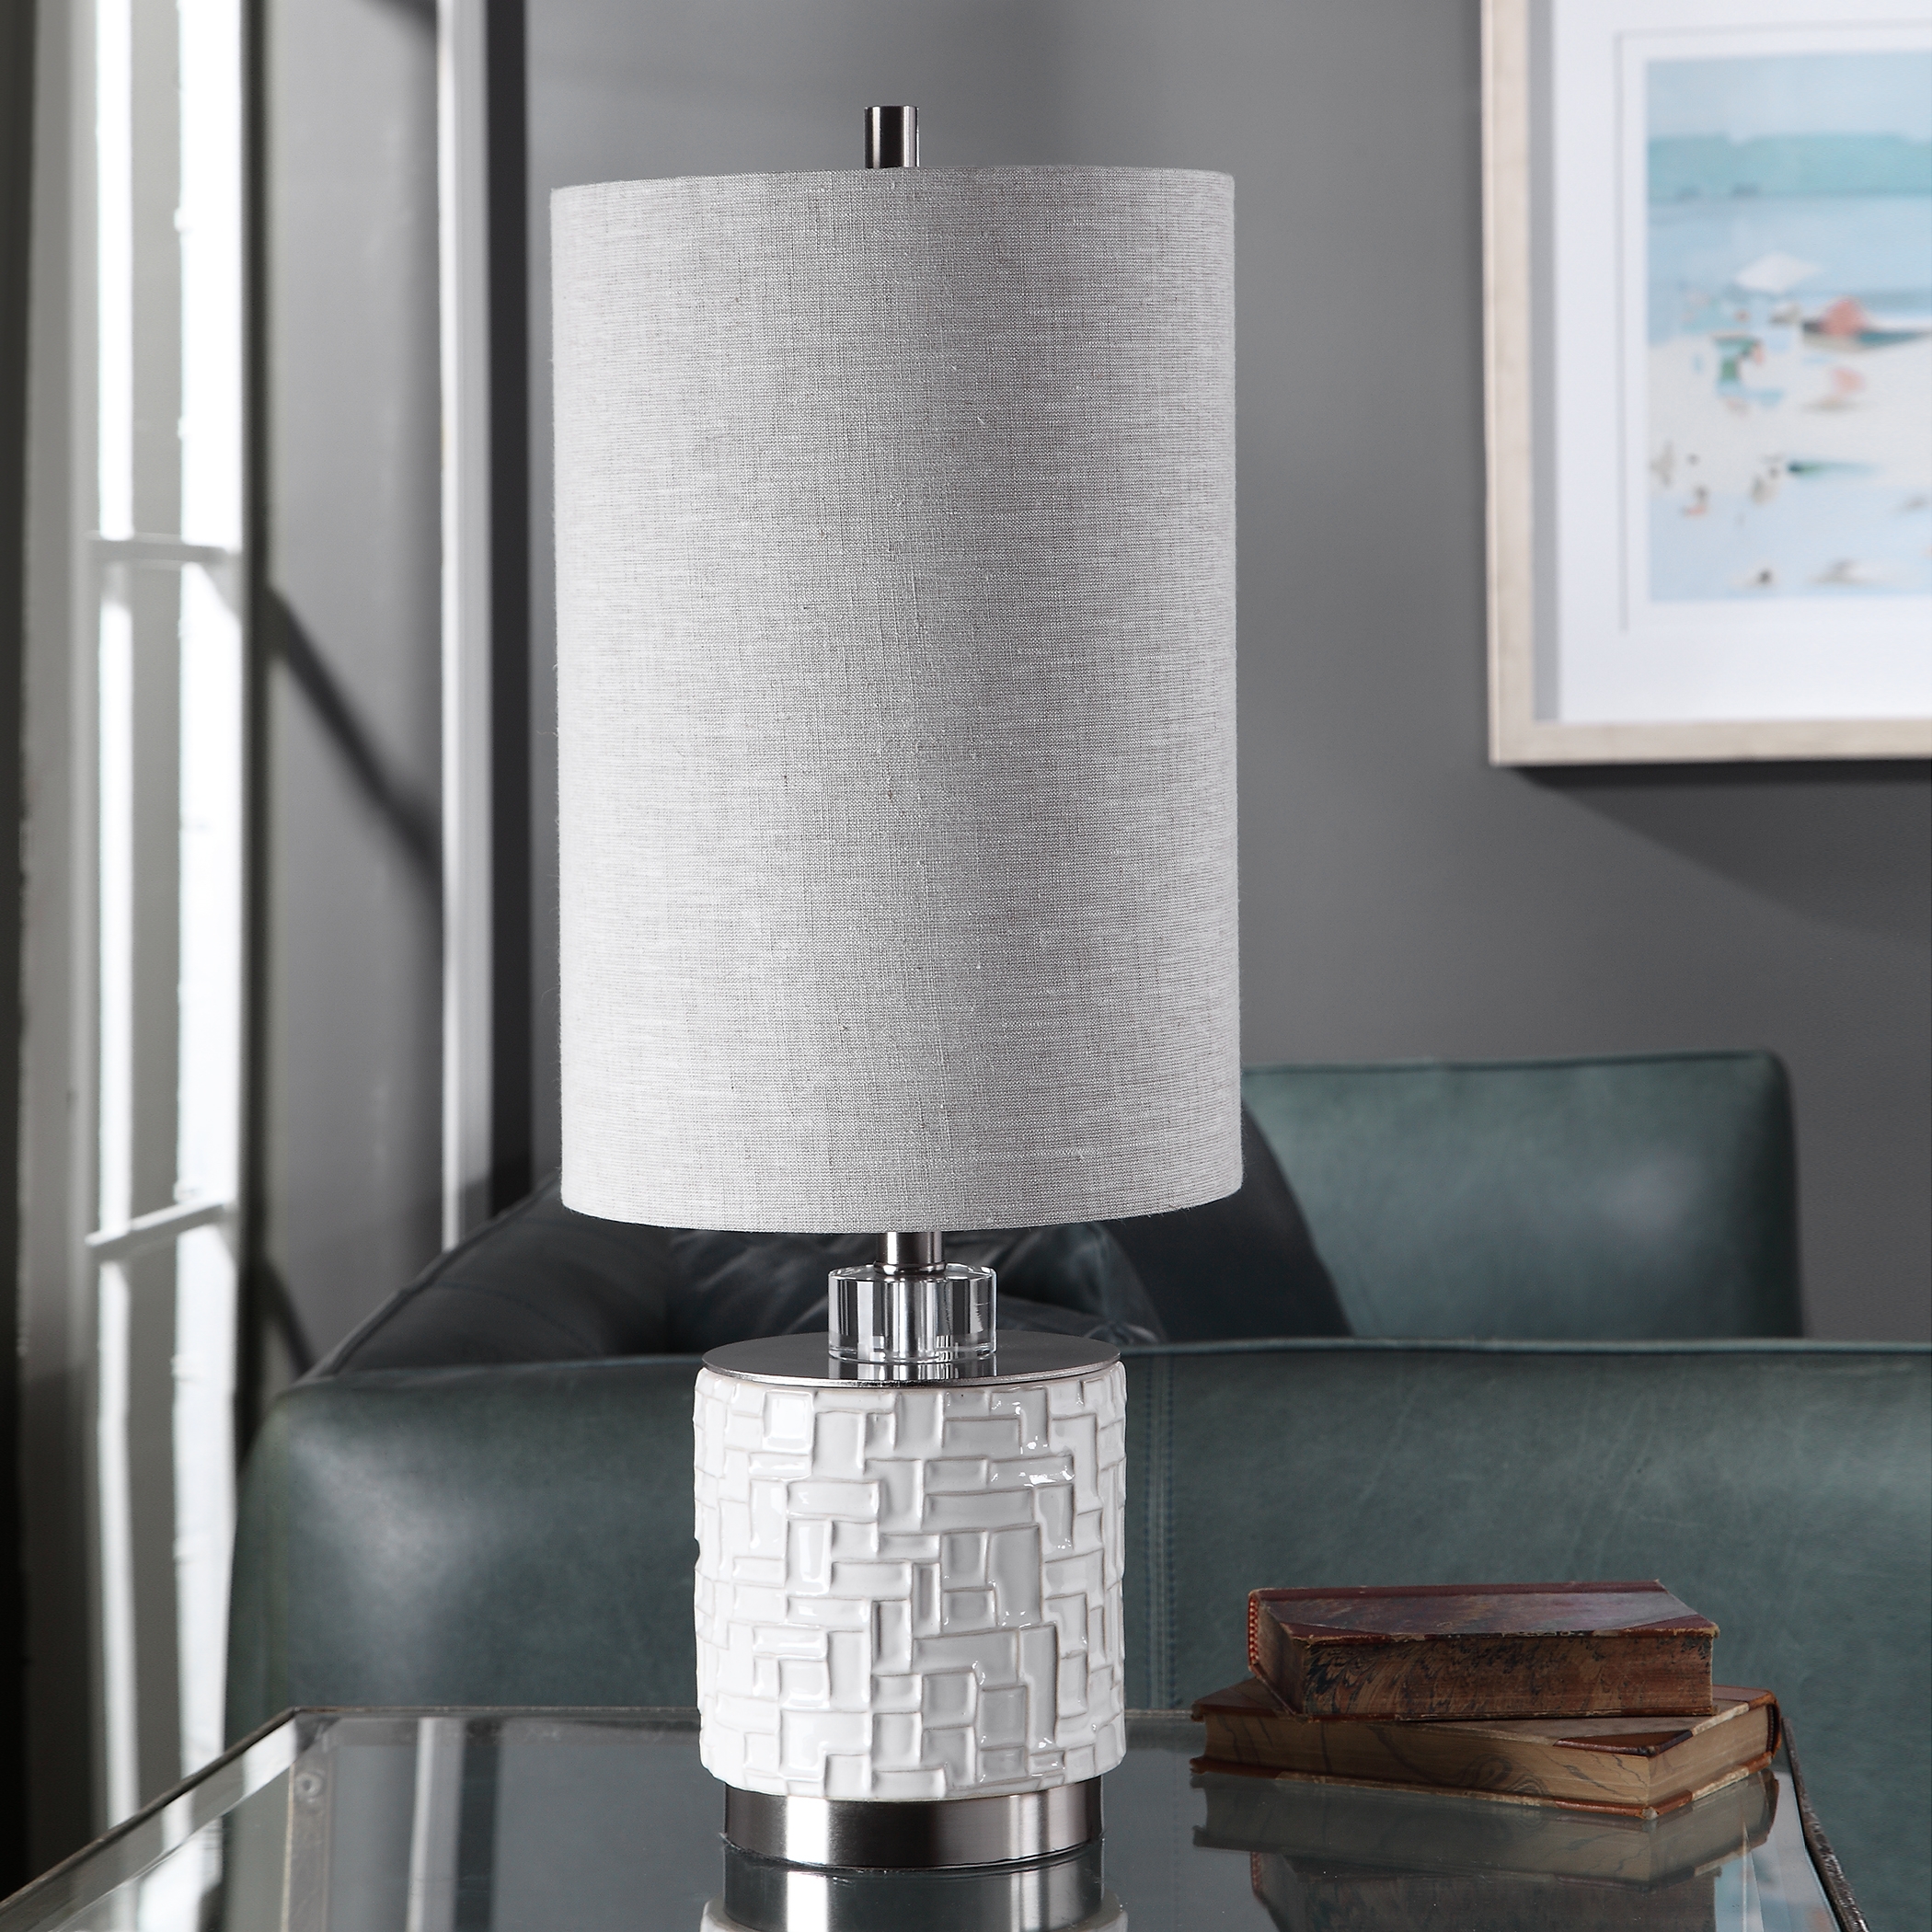 Elyn Glossy White Accent Lamp - Image 5